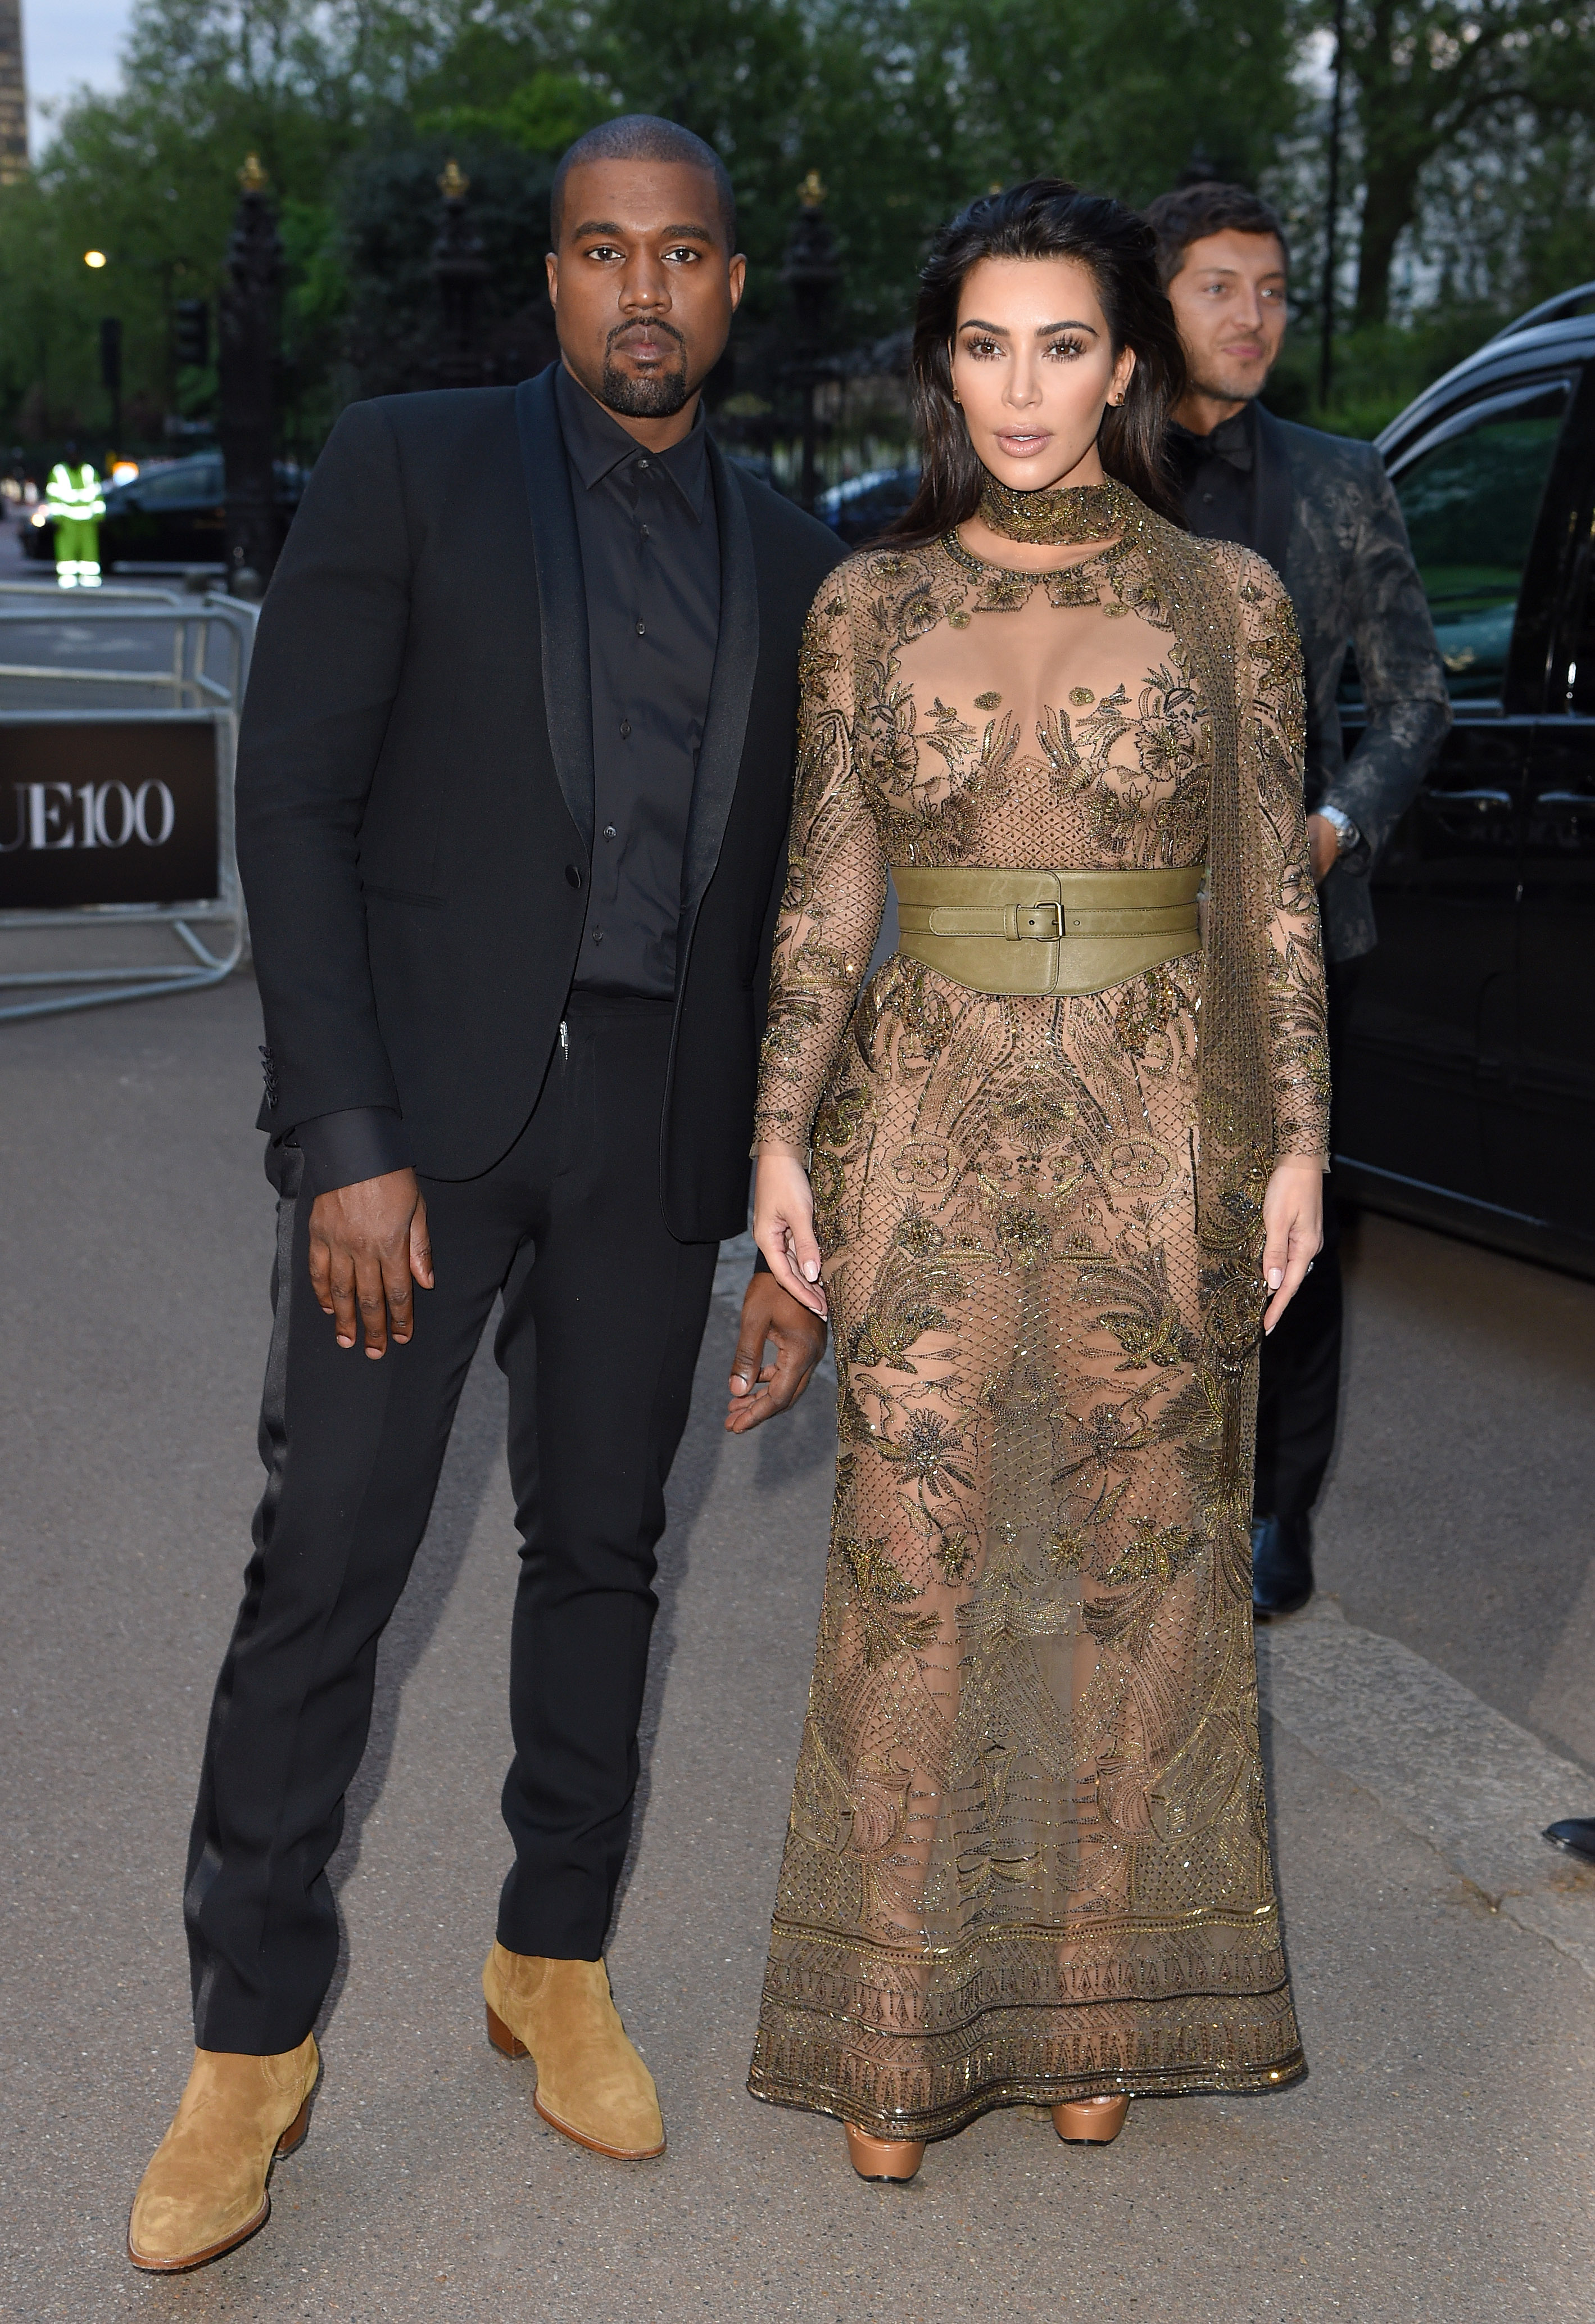 Kanye West and Kim Kardashian West arrive for the Gala to celebrate the Vogue 100 Festival at Kensington Gardens on May 23, 2016